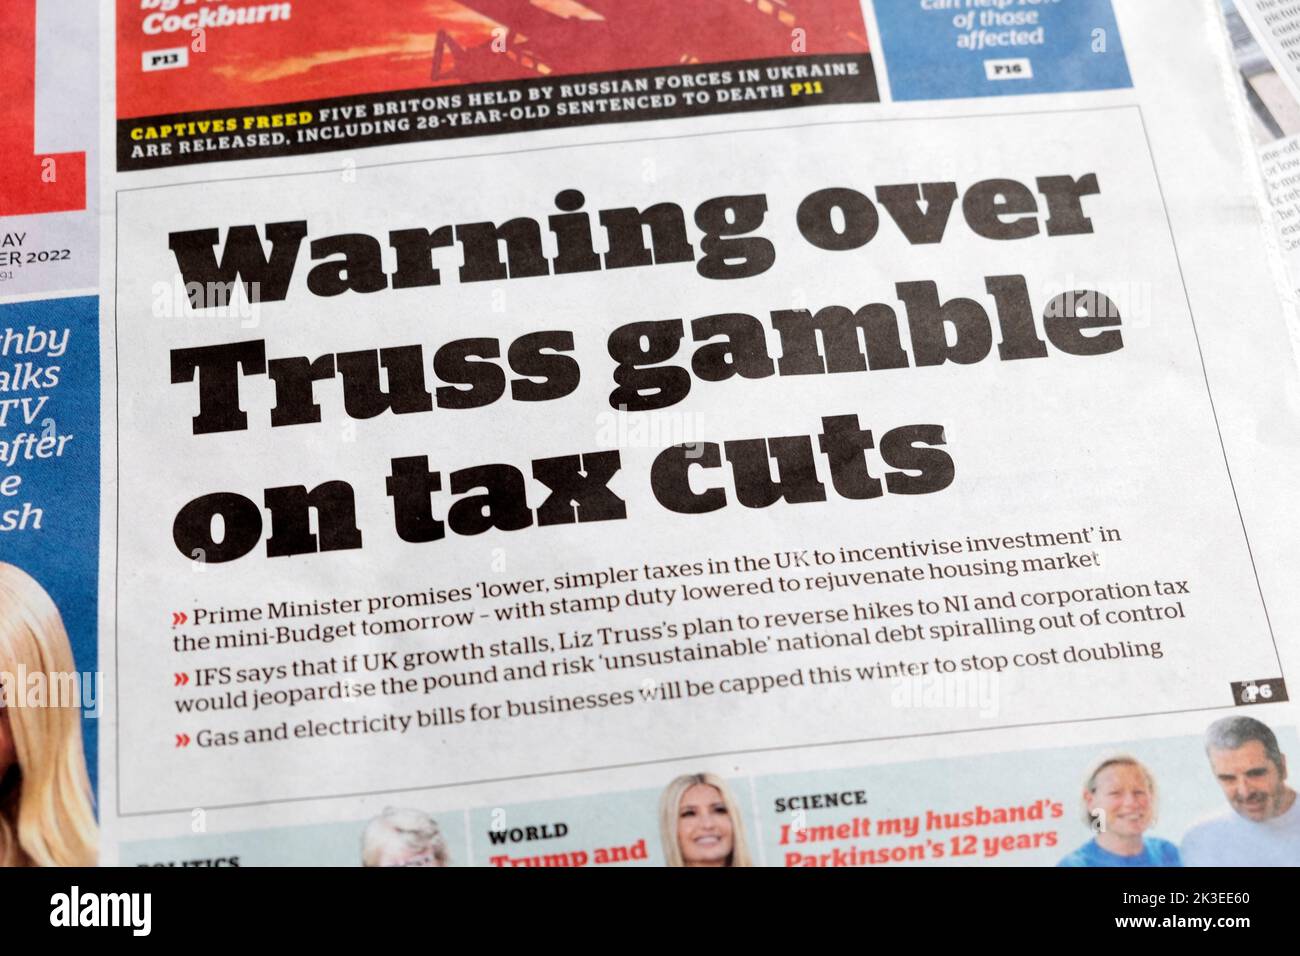 'Warning over Truss gamble on tax cuts' i newspaper headline front page 22 September 2022 London UK Stock Photo